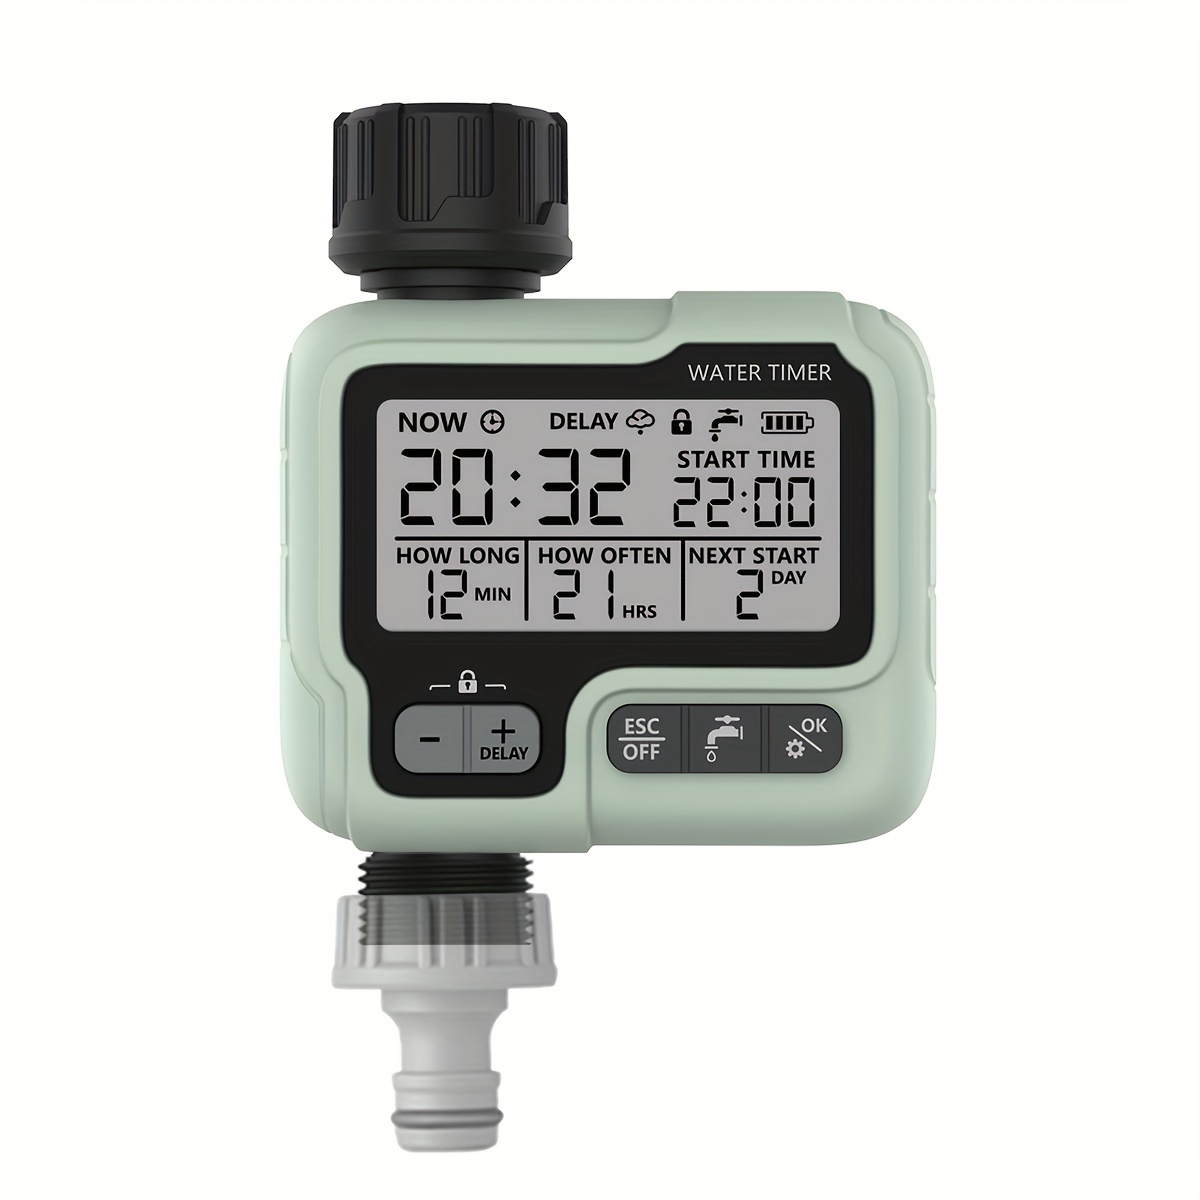 

1pc Water Timer For 3/4" Us Connector Super Garden Tools Irrigation System Sprinkler Controller For All Seasons And Multiple Scenarios Compact And Portable With Complete Functions 4.9*3.9*1.9in